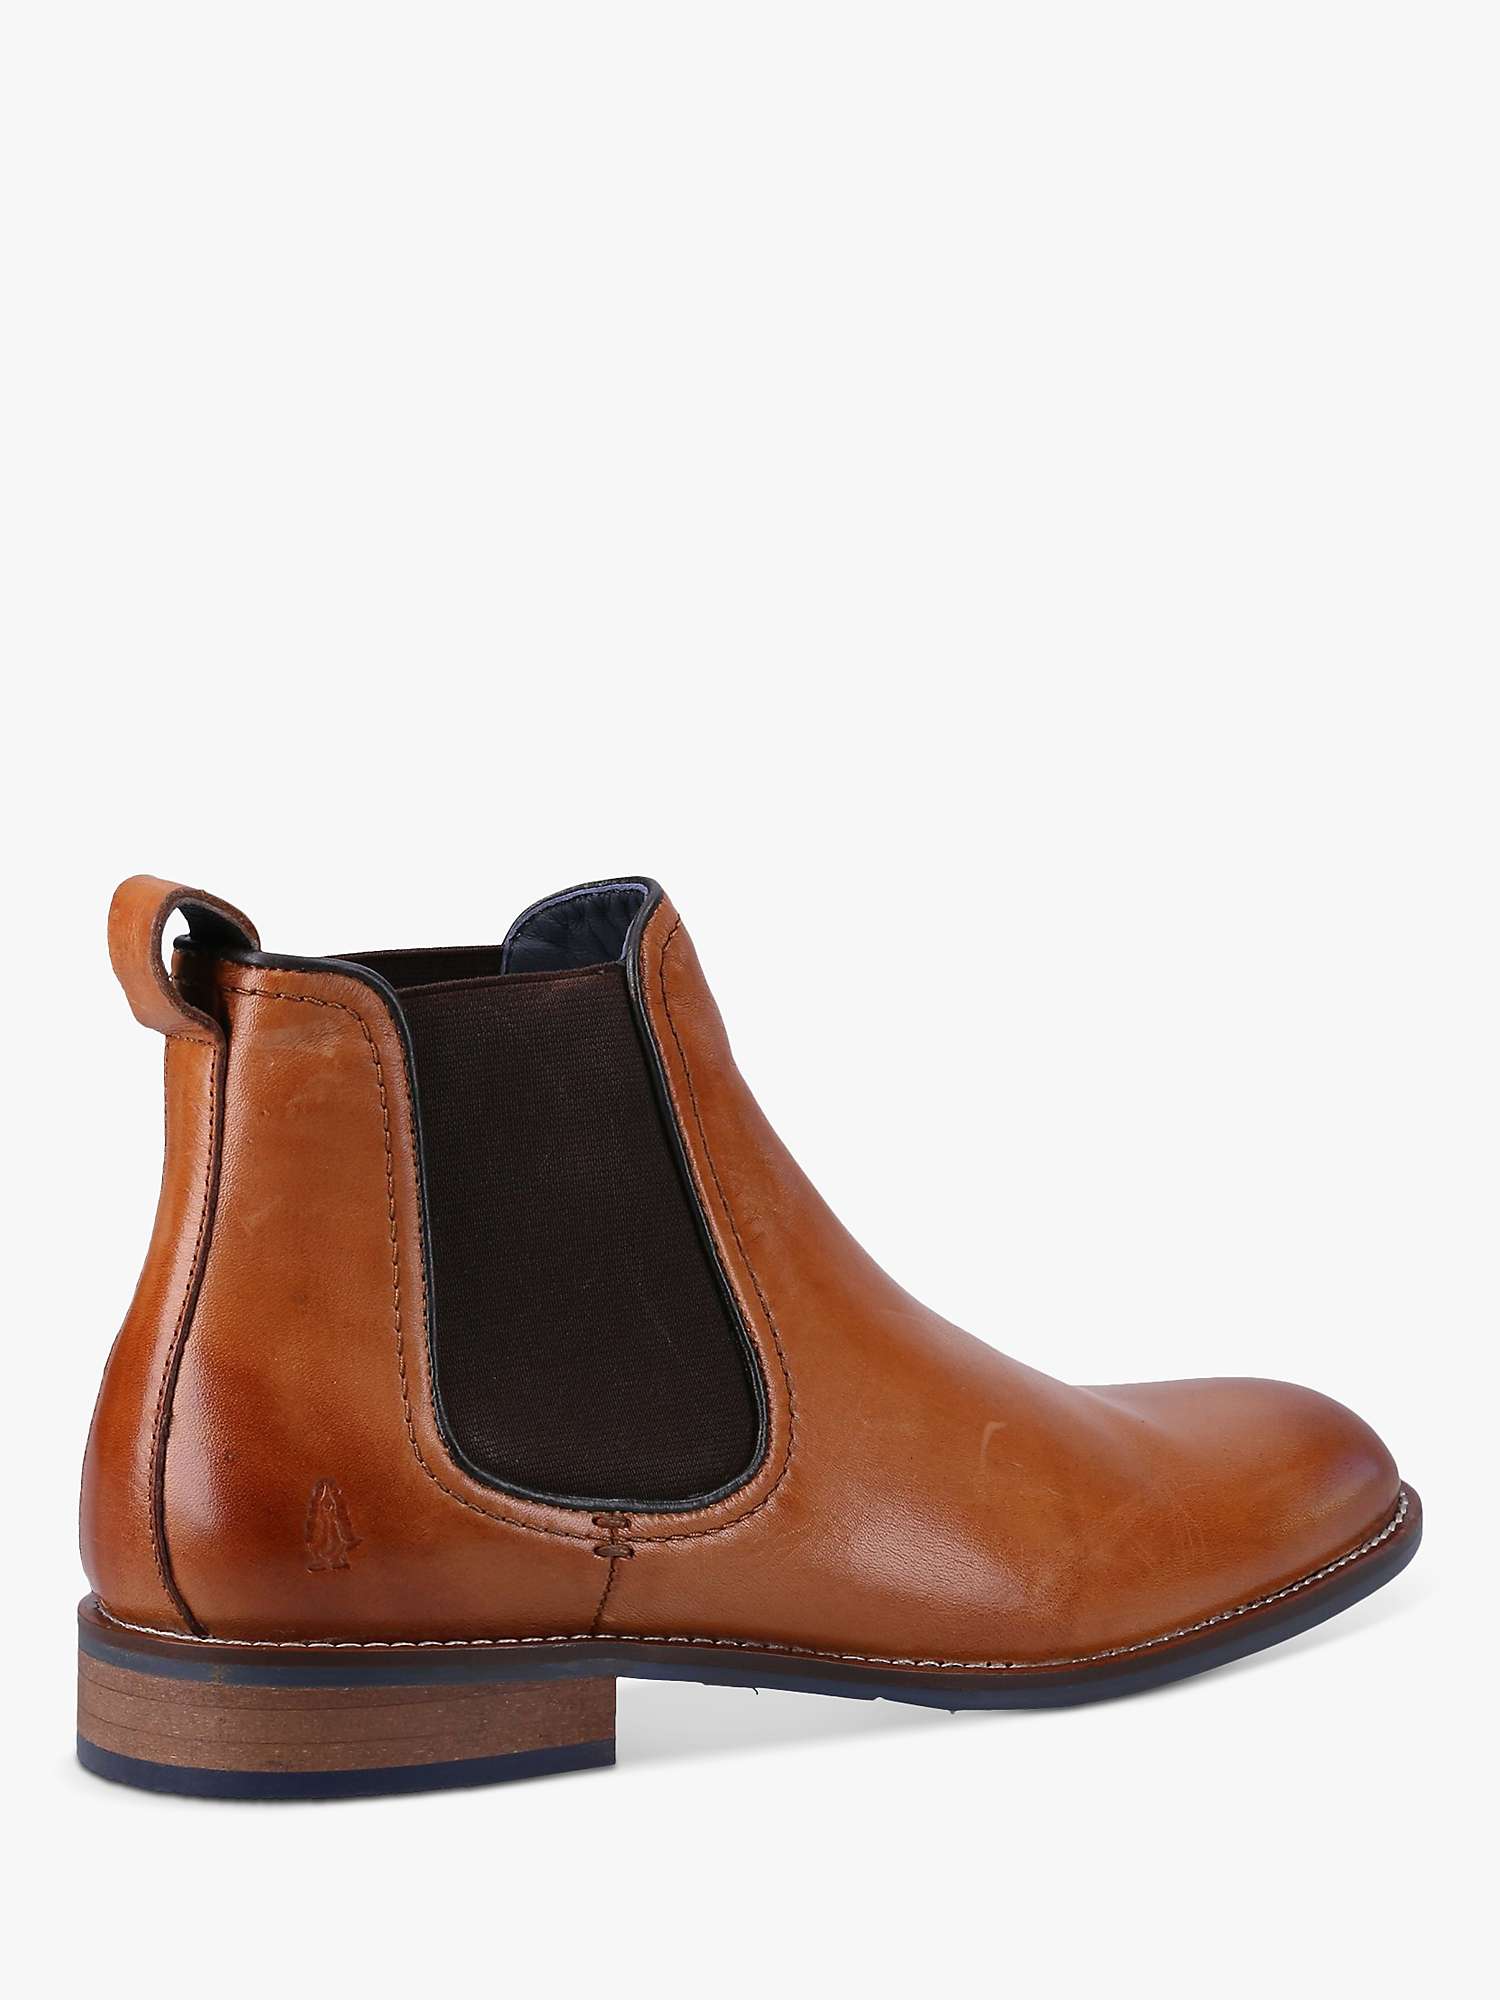 Buy Hush Puppies Diego Leather Chelsea Boots Online at johnlewis.com